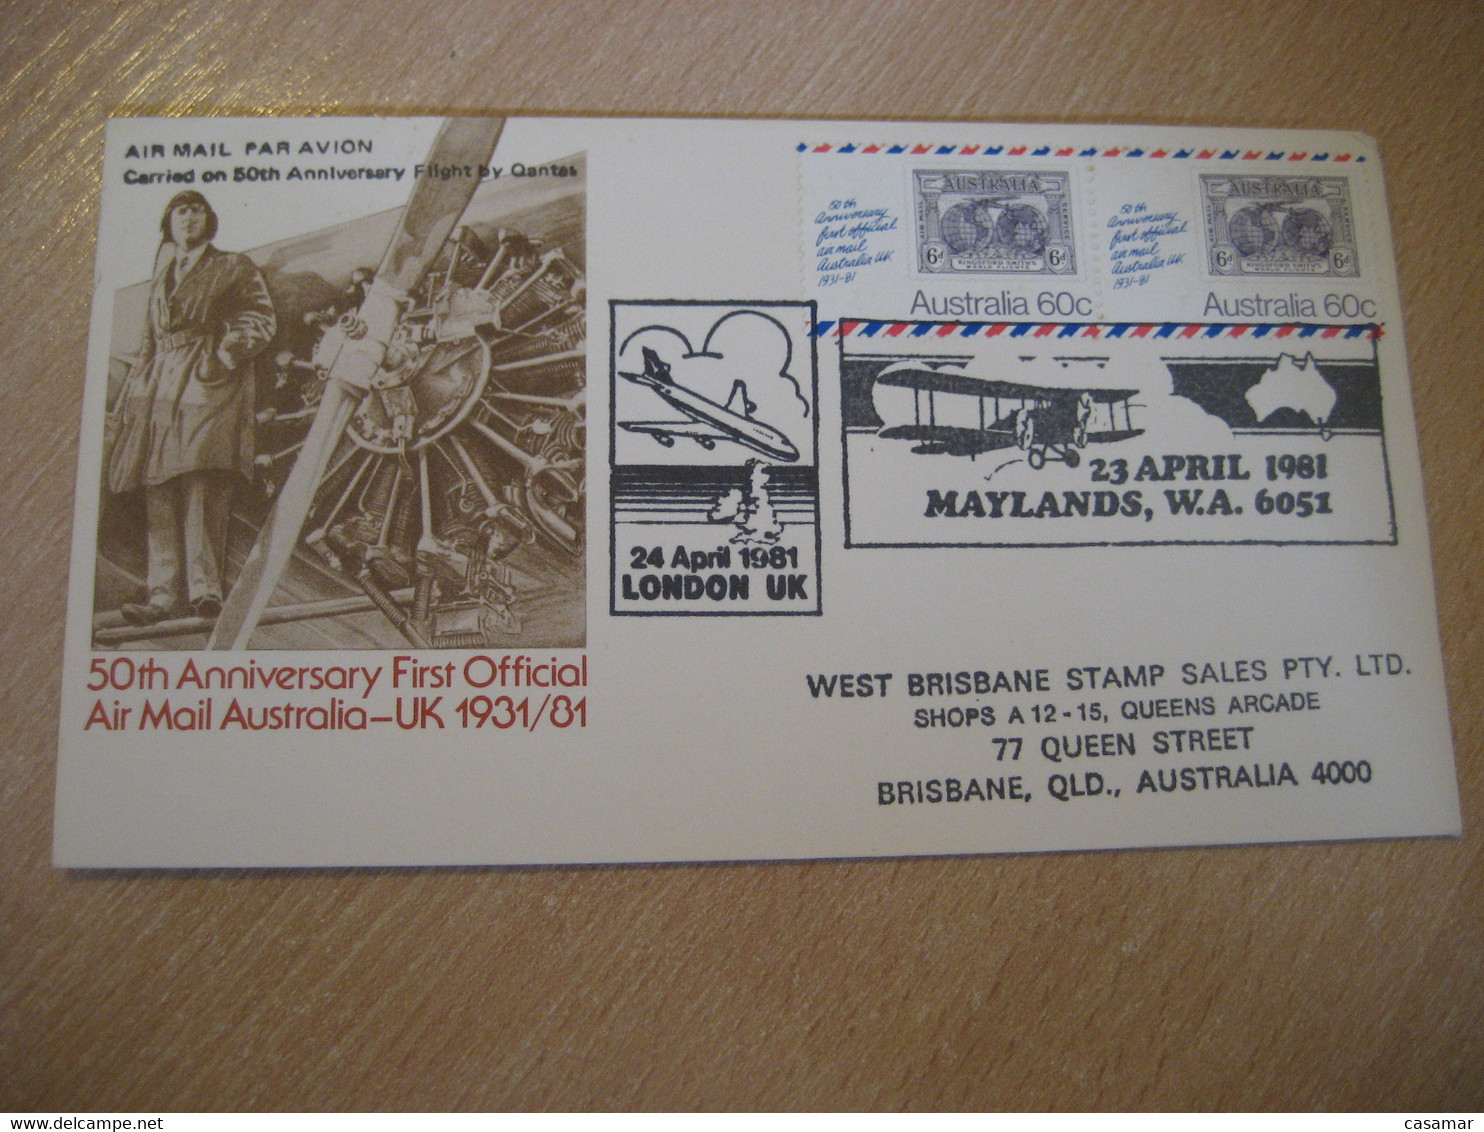 LONDON MAYLANDS 50th Anniv. 1931 First Official Air Mail QANTAS First Flight Cancel Cover ENGLAND AUSTRALIA - Premiers Vols